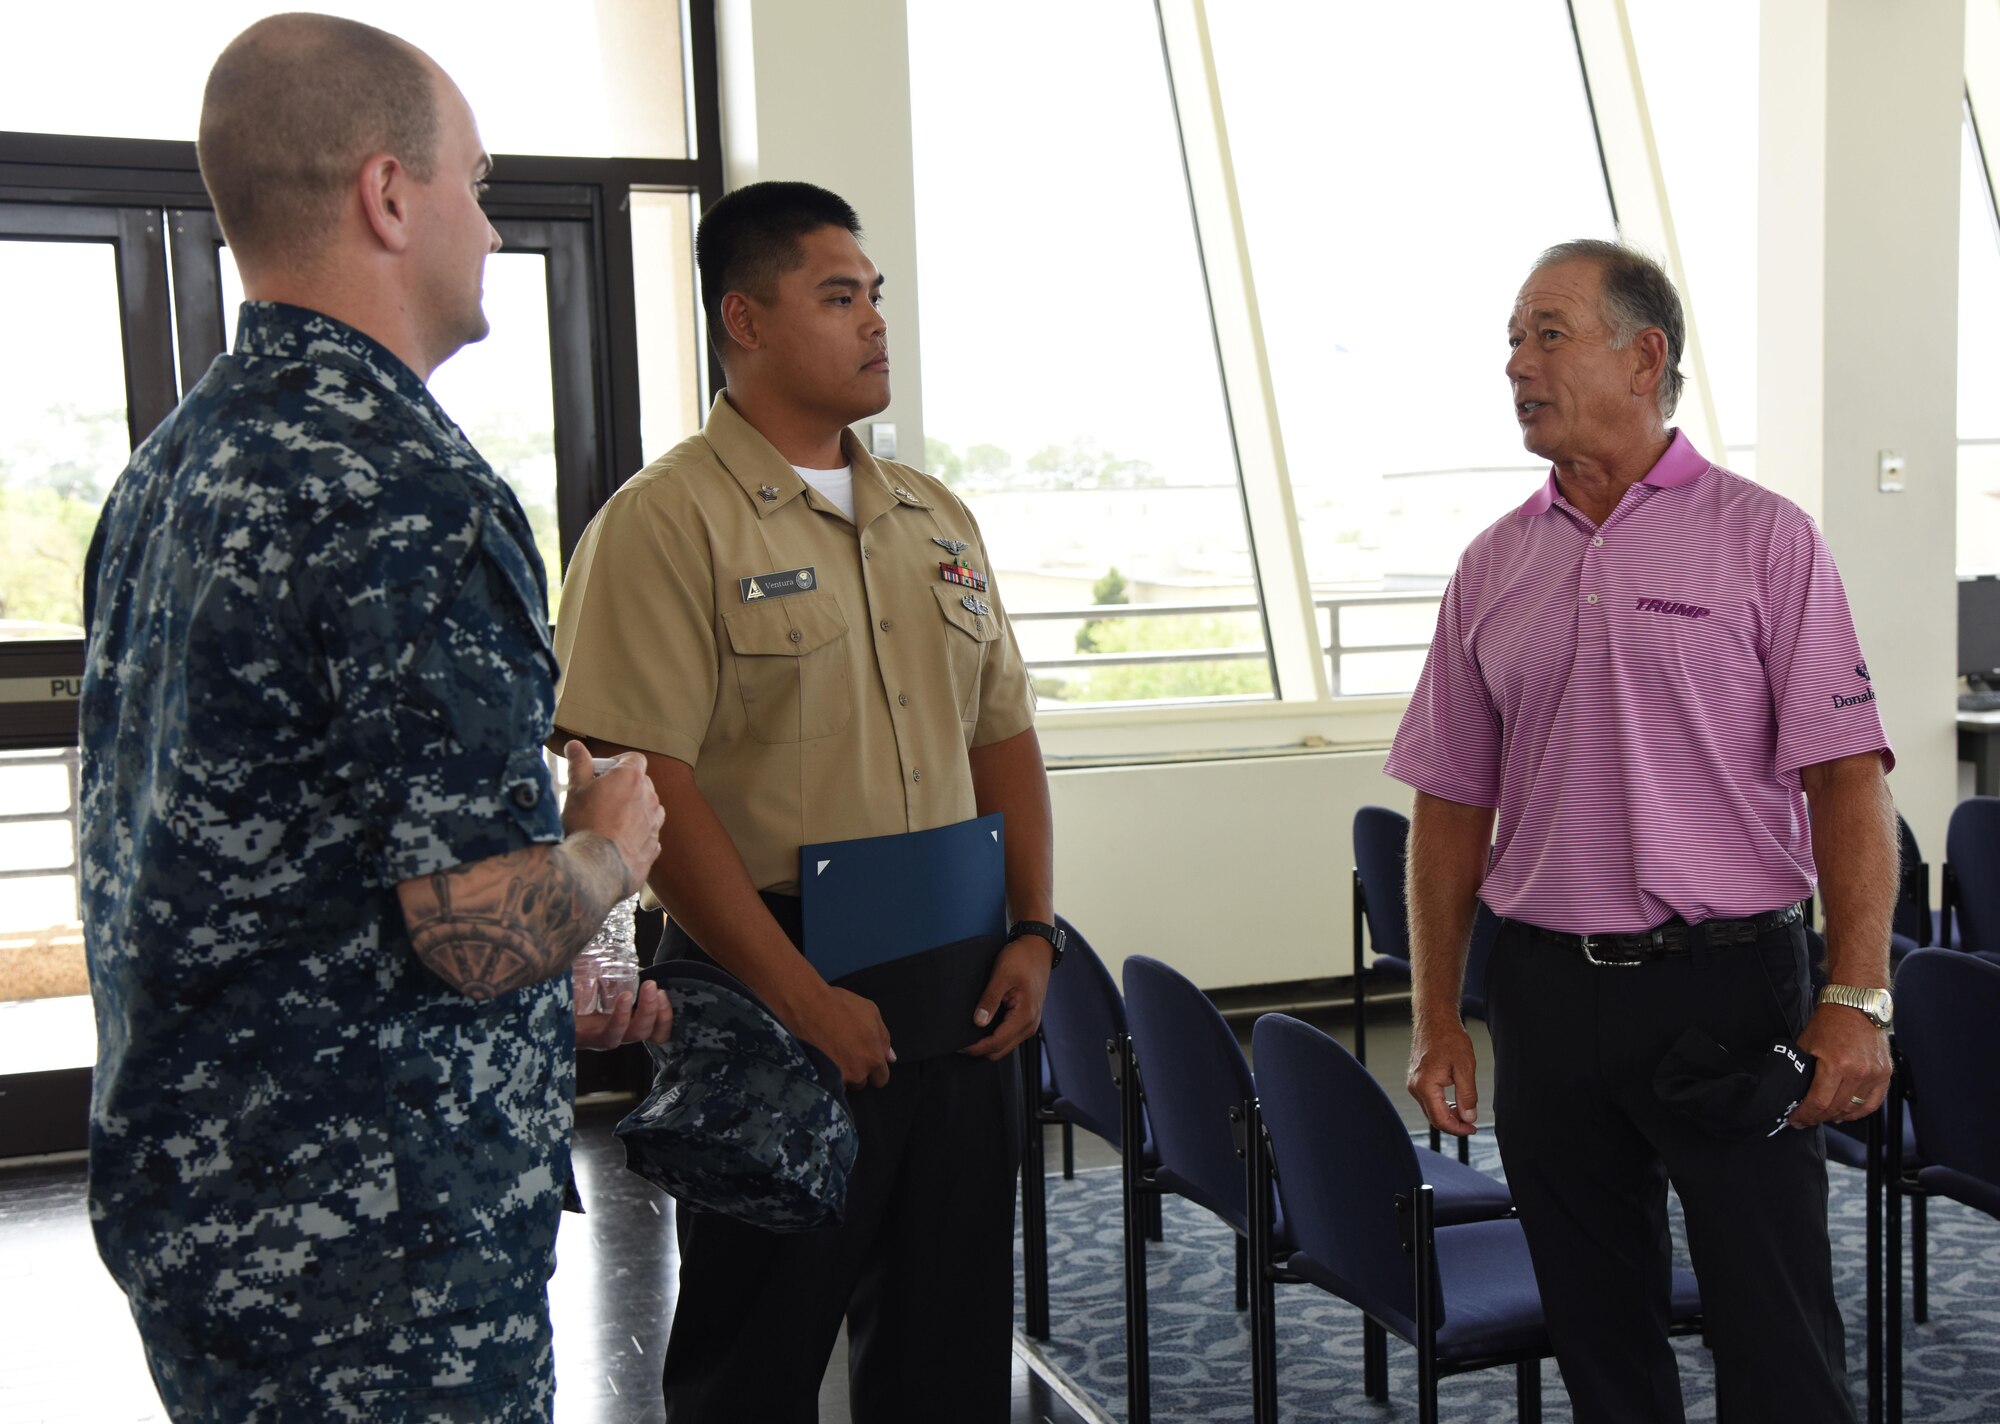 Mike Goodes, Senior Professional Golfers’ Association player, speaks with U.S. Navy Petty Officers 1st Class Ian Smith and Paul Ventura, Center for Naval Aviation Technical Training Unit Keesler instructors, during a tour of the Weather Training Complex March 29, 2017, on Keesler Air Force Base, Miss. Goodes, who participated in the 2017 Mississippi Resort Golf Classic, also received a windshield tour of Keesler and viewed a WC-130J Hercules static display. (U.S. Air Force photo by Kemberly Groue)